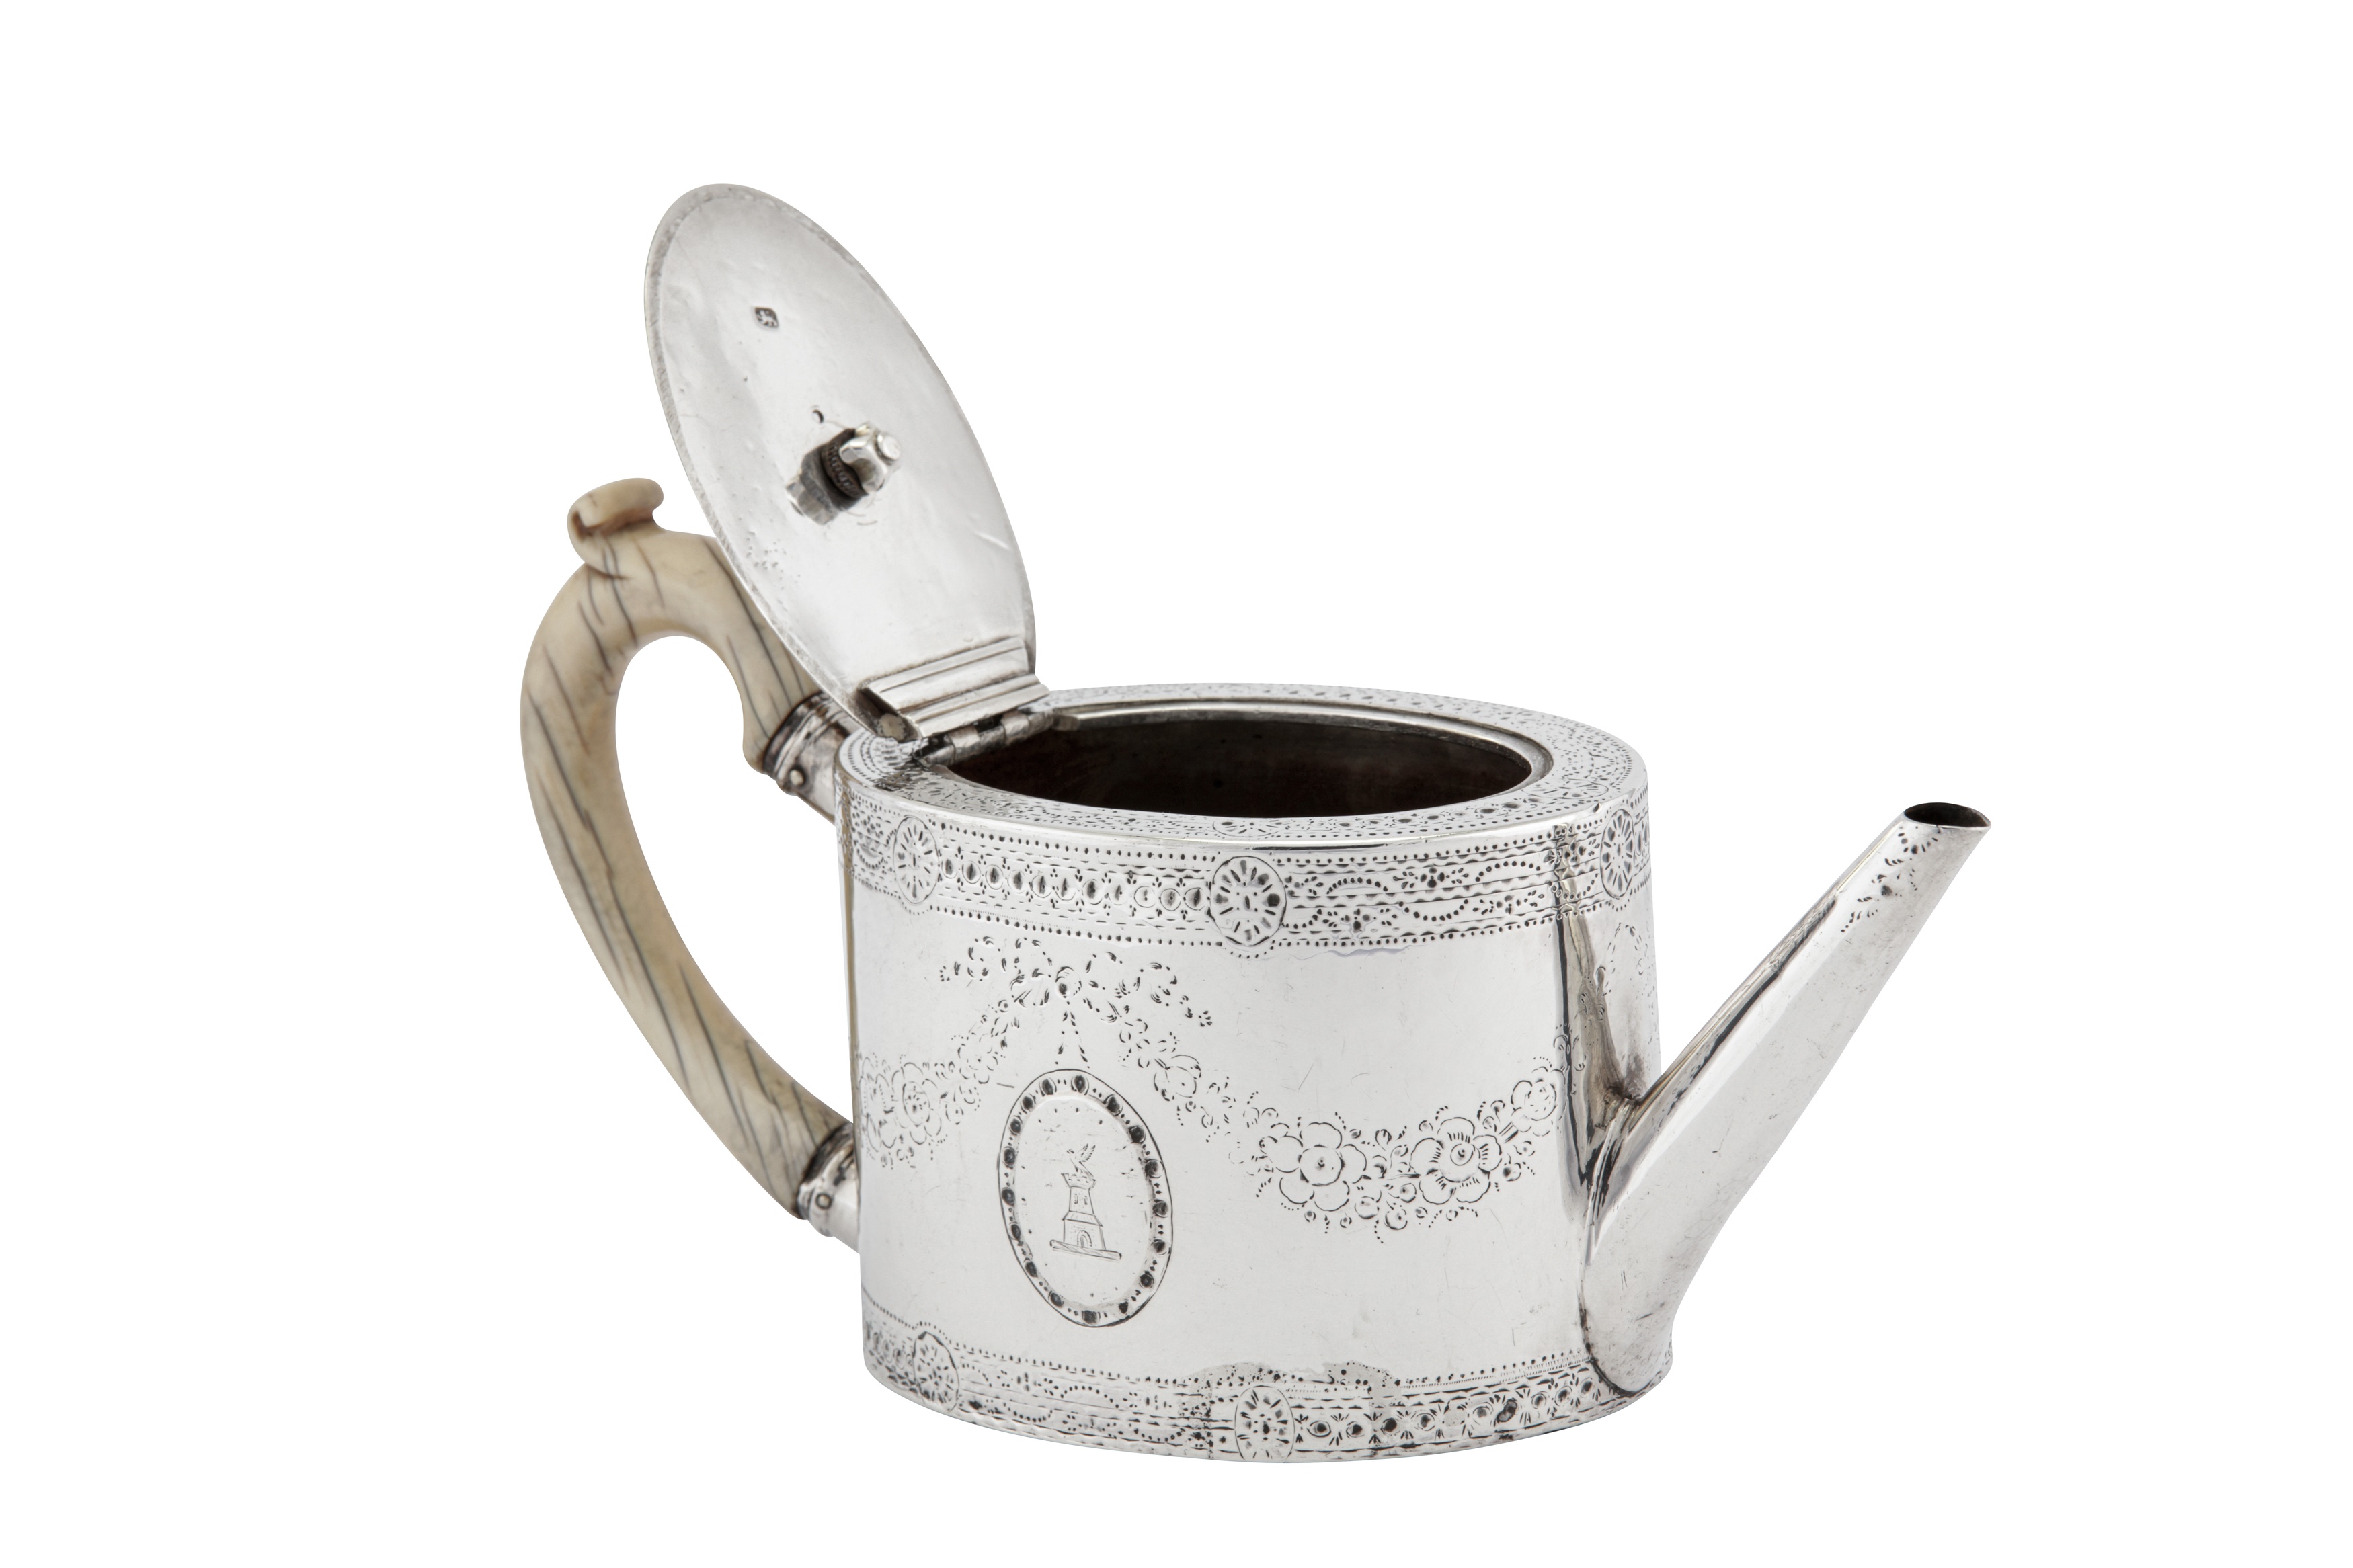 A George III sterling silver teapot, London 1779 by Thomas Daniell - Image 3 of 6